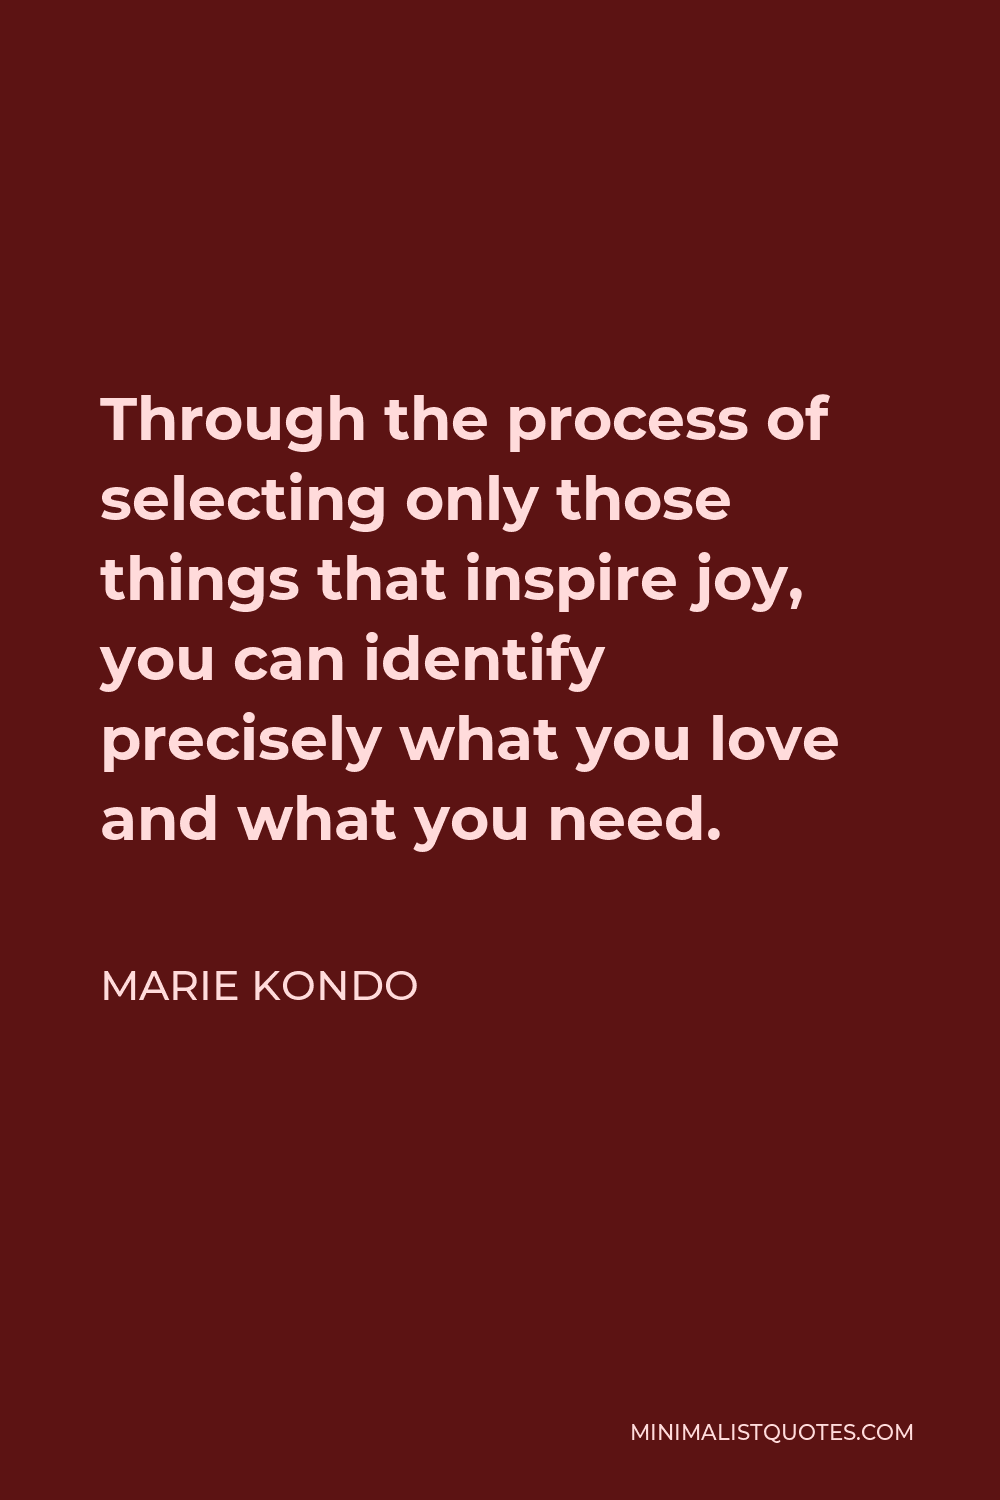 Marie Kondo Quote - Through the process of selecting only those things that inspire joy, you can identify precisely what you love and what you need.